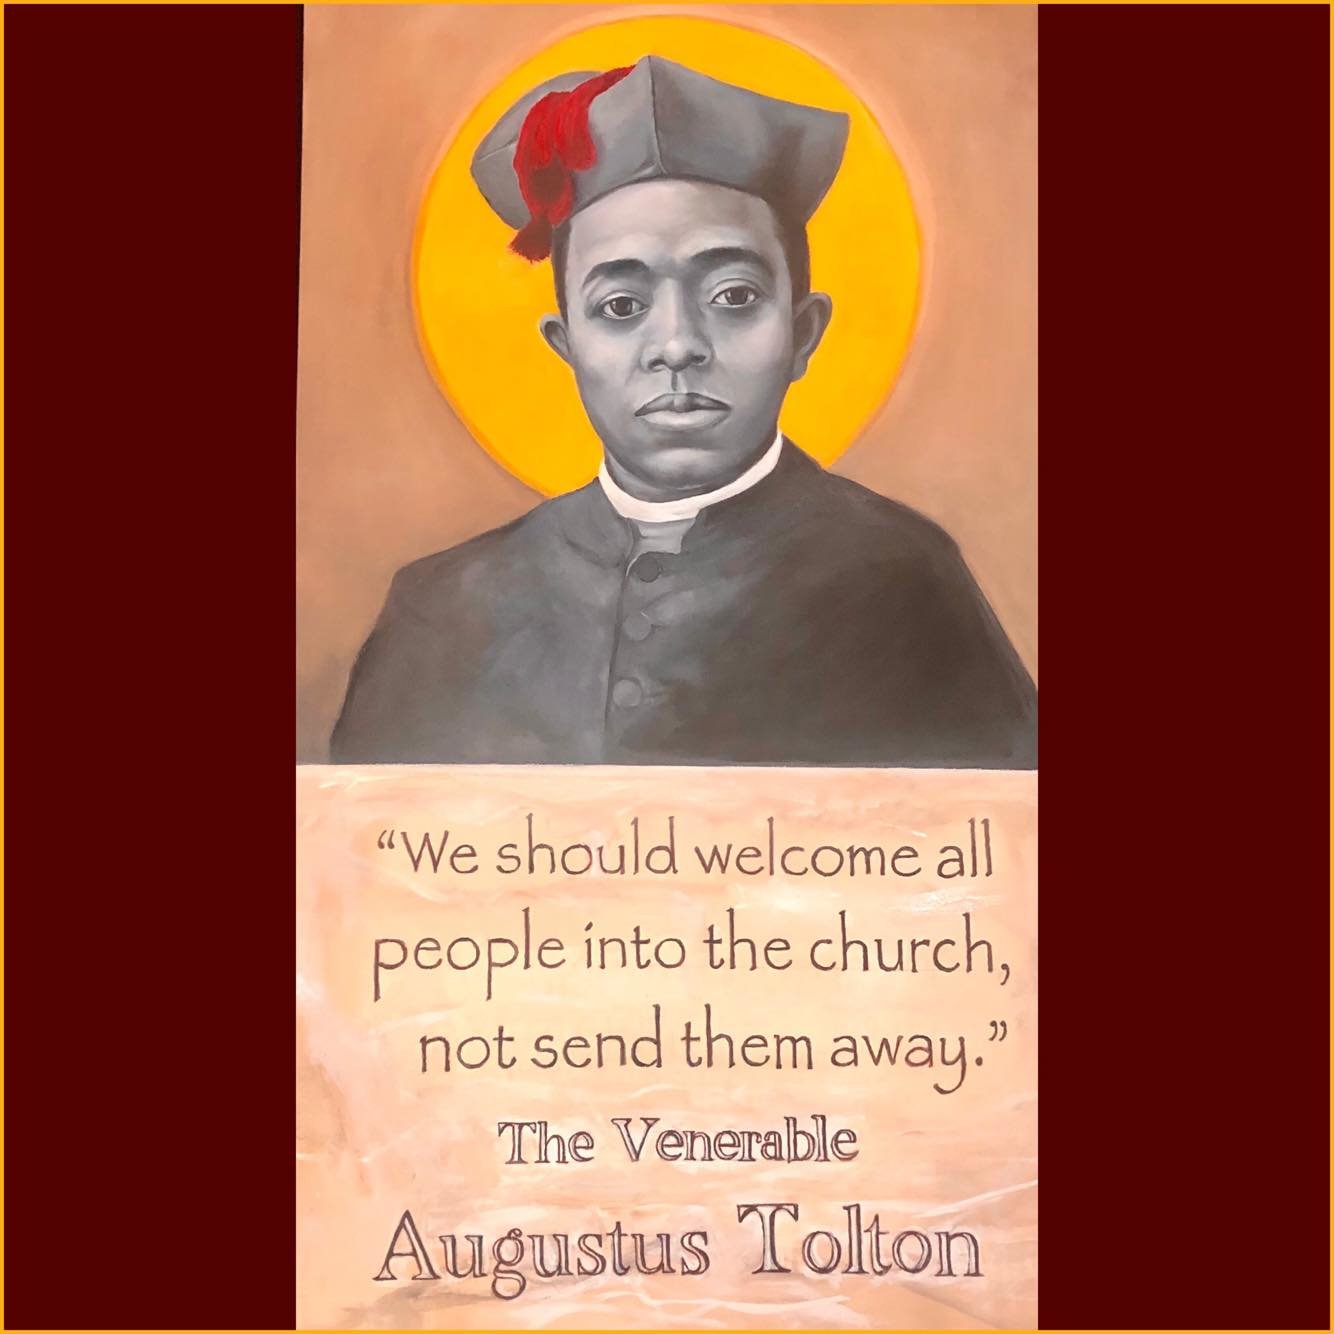 Francis Washington, art teacher at St. Anthony of Padua School in Washington, D.C., created this image of Venerable Father Augustus Tolton and illustration of one of his sayings.